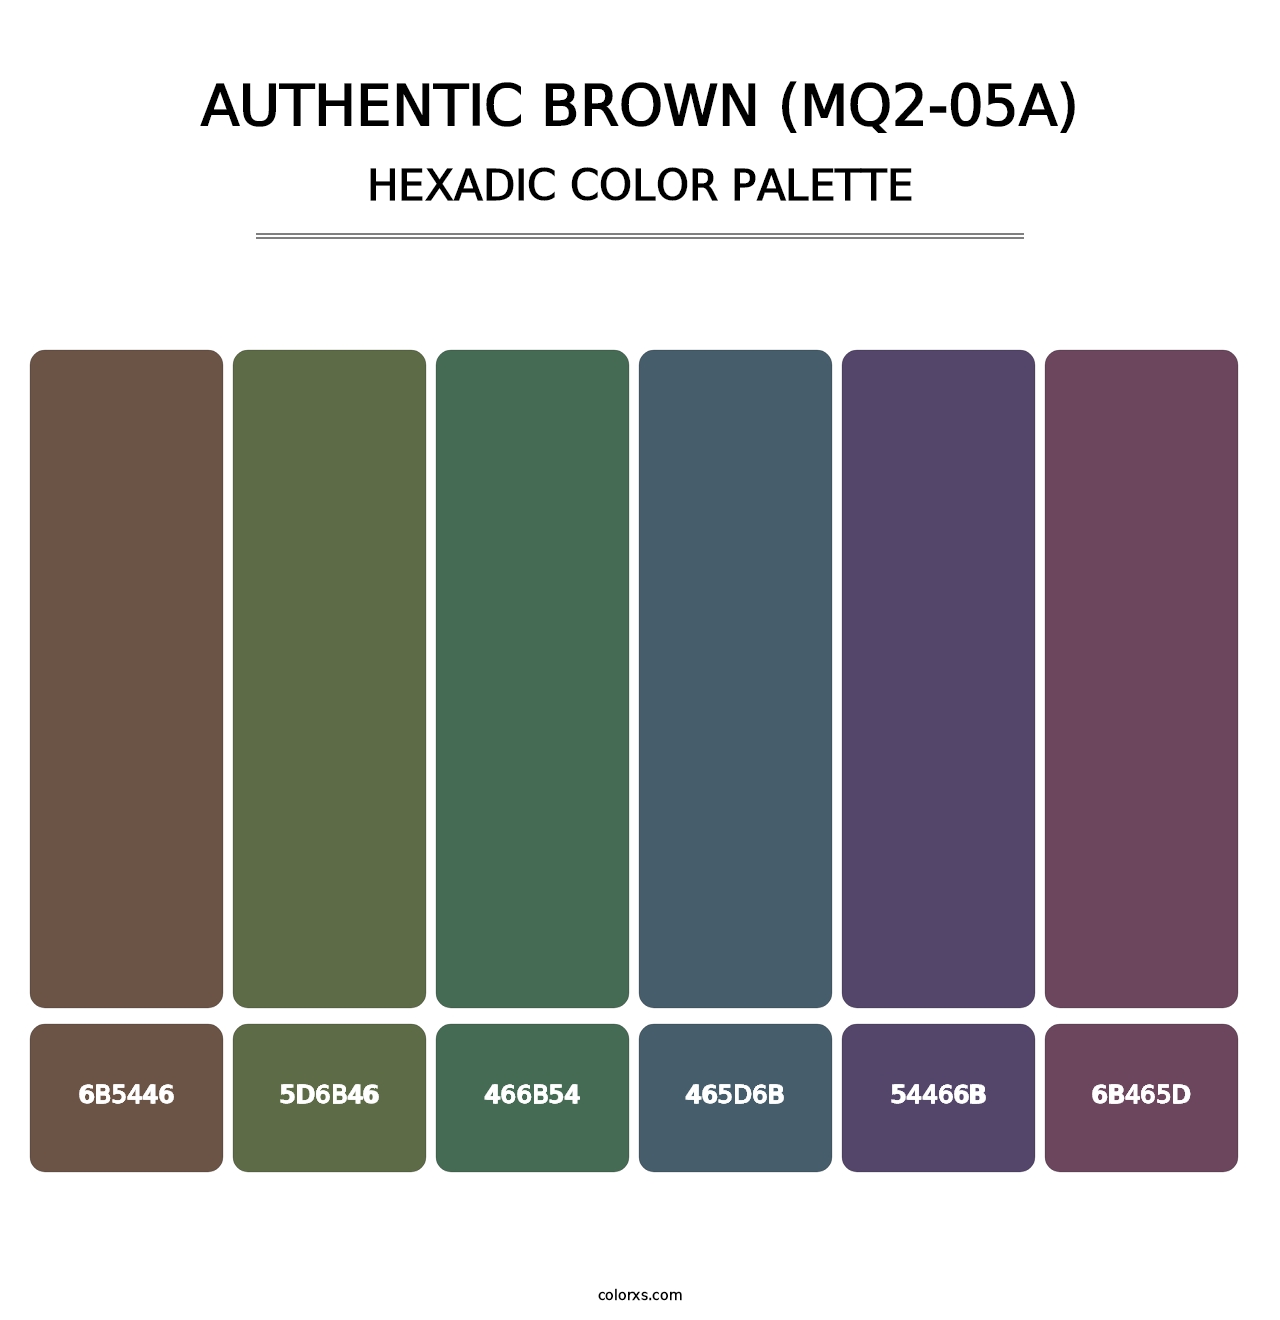 Authentic Brown (MQ2-05A) - Hexadic Color Palette